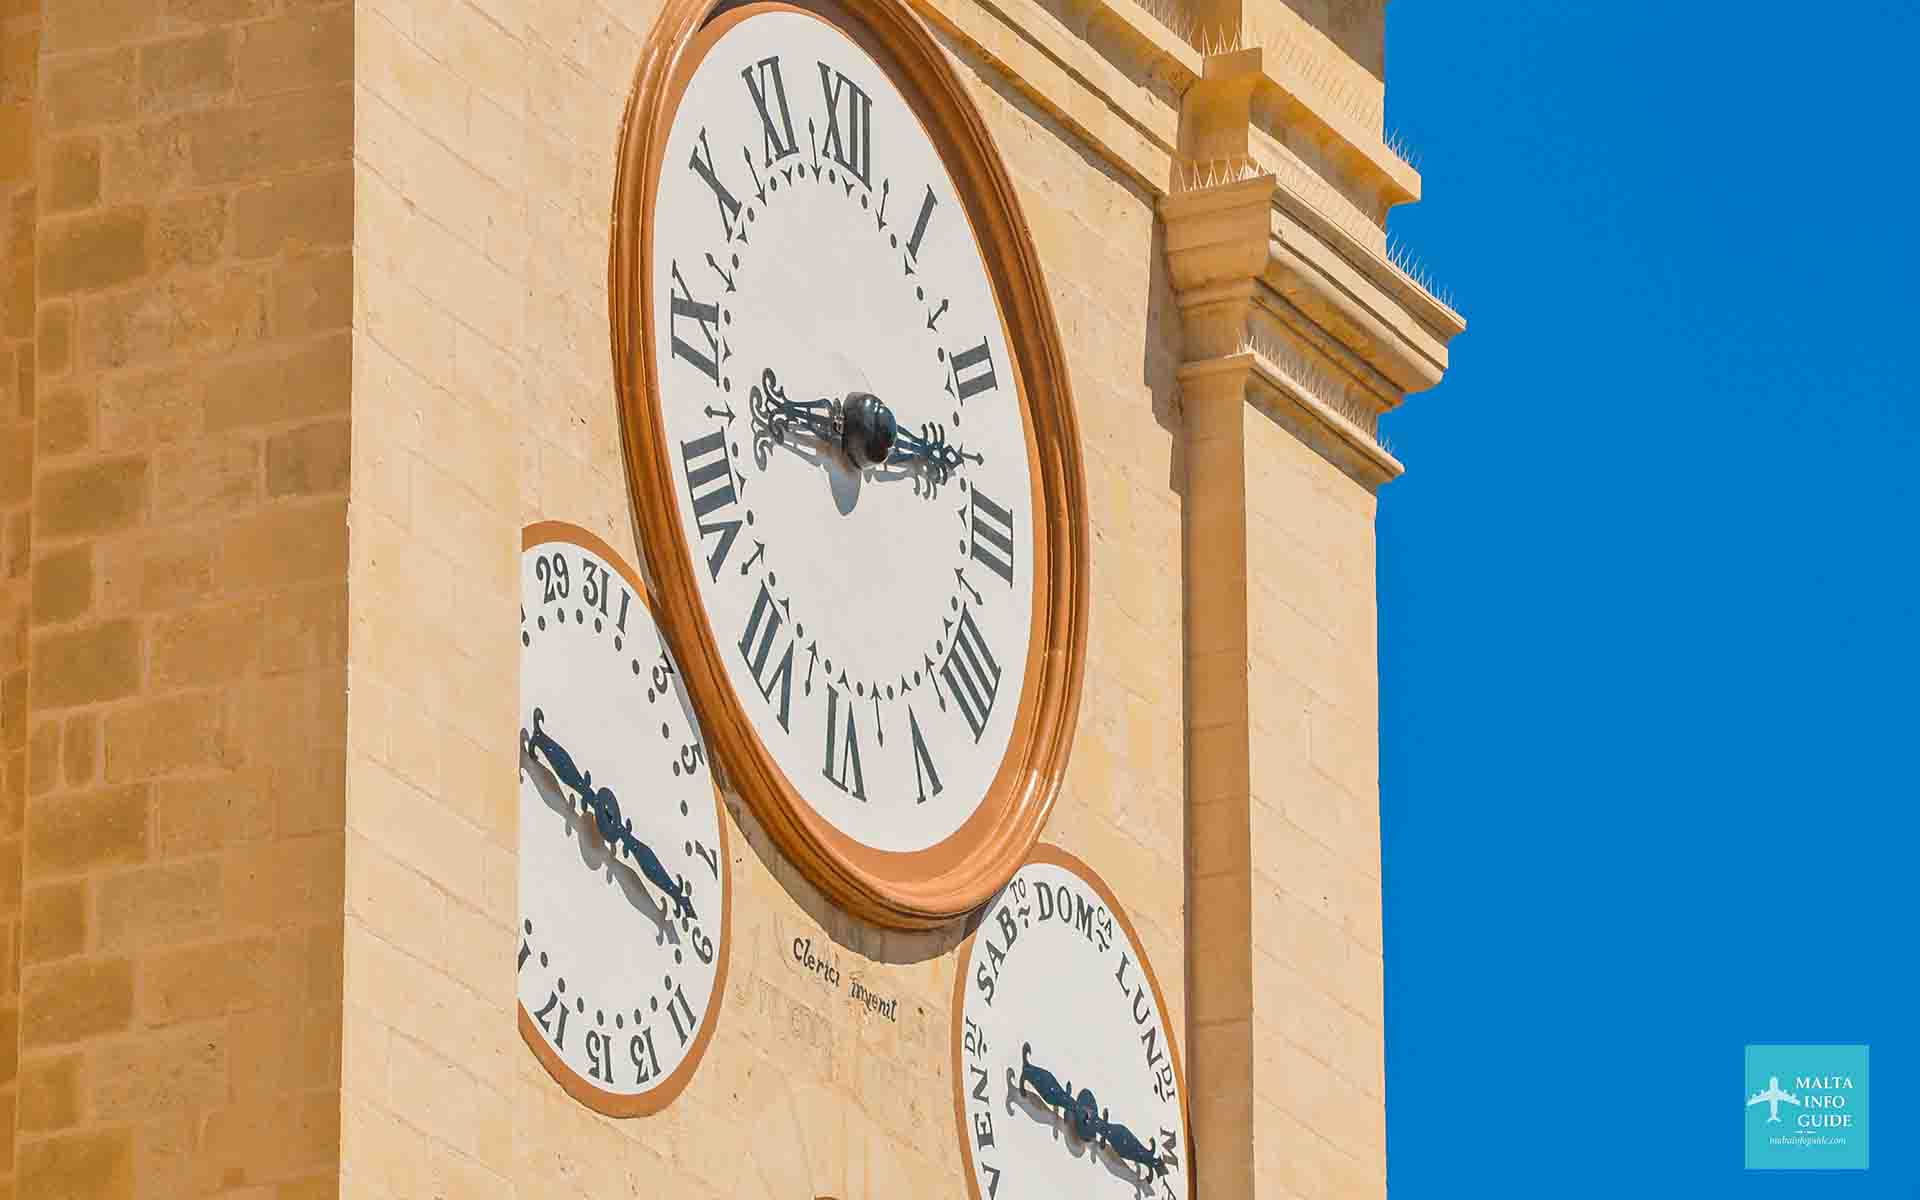 The time in Malta showing on St. John's Co-Cathedral Tower.